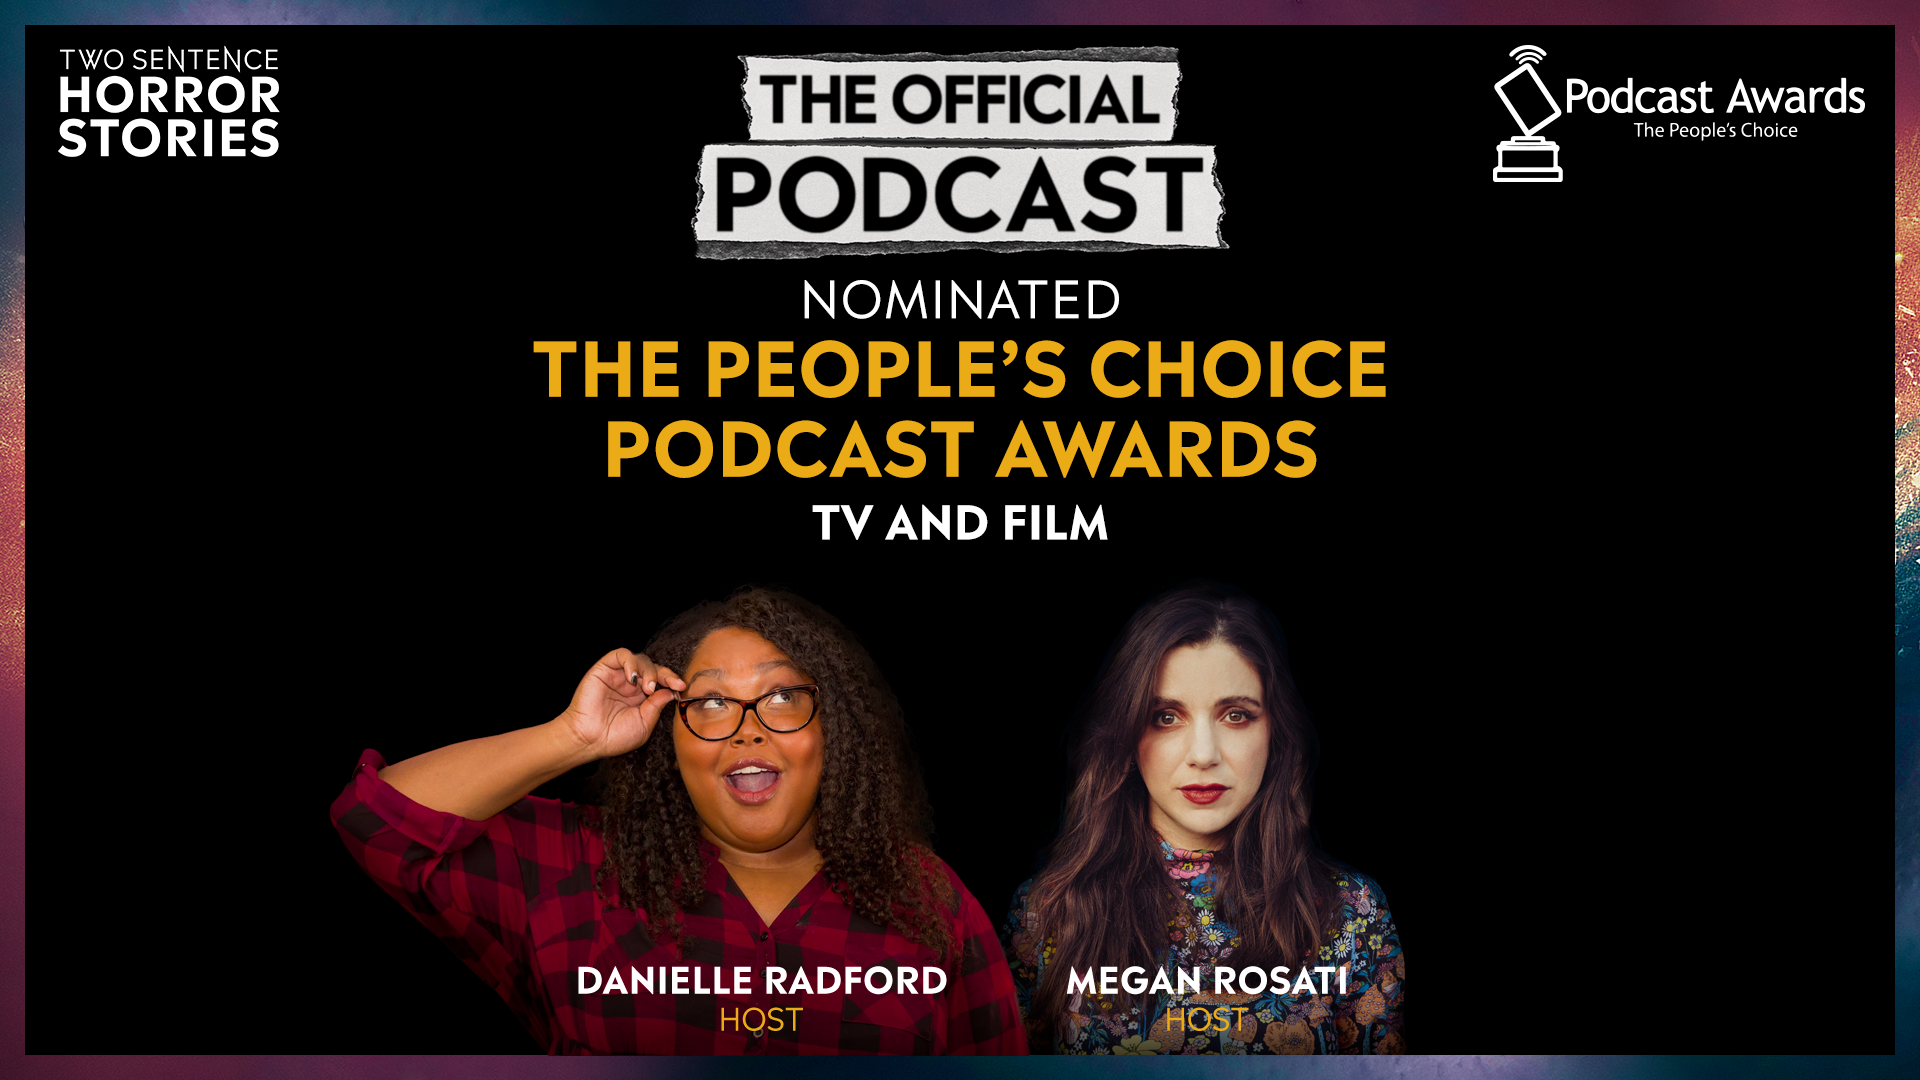 Two Sentence Horror Stories Podcast nominated for the people's choice podcast awards